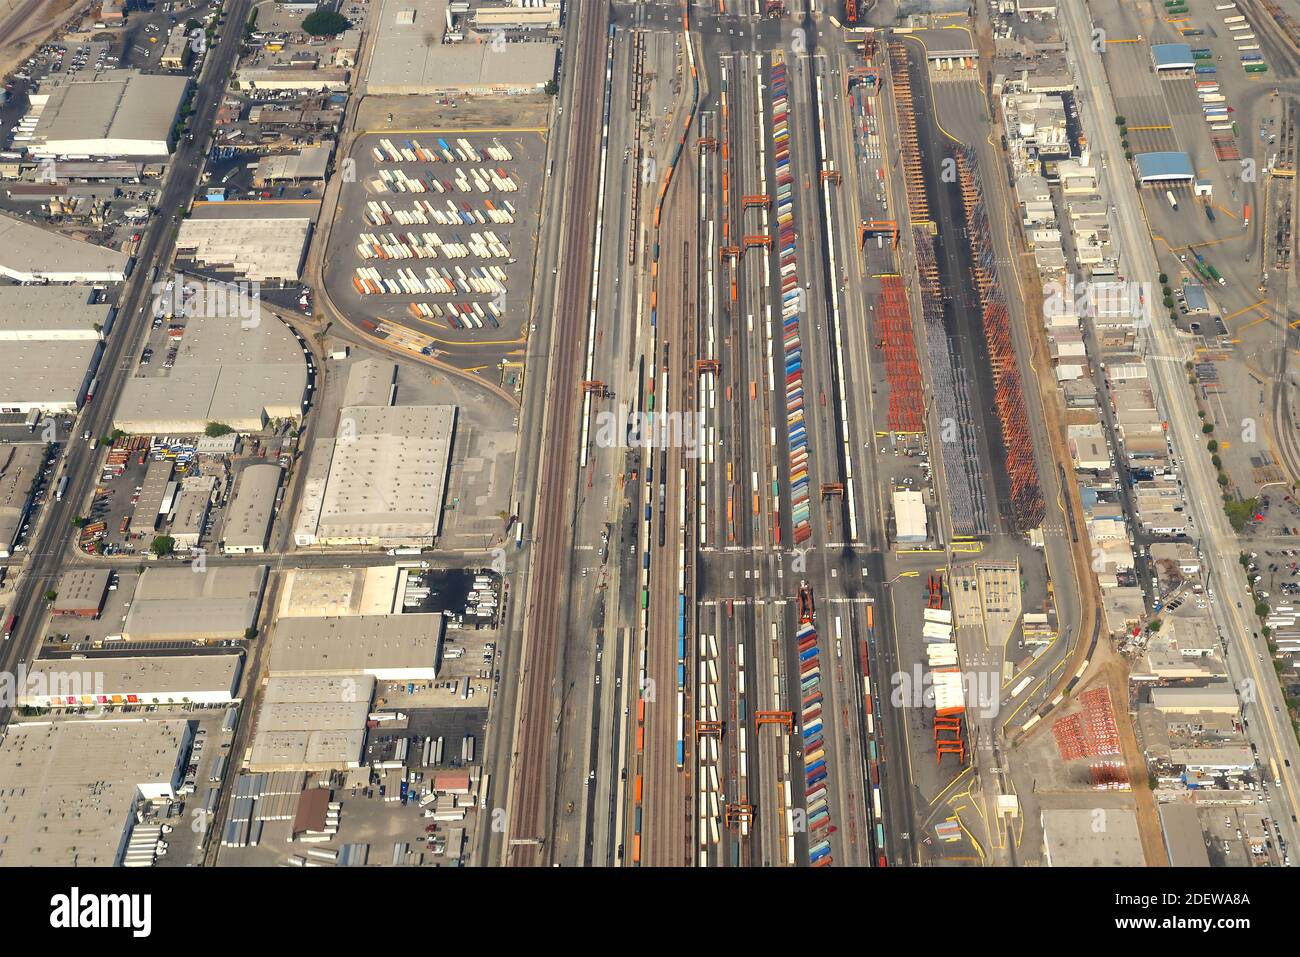 BNSF Railway Company intermodal cargo operations at Los Angeles, USA. Aerial view of freight transportation facility with multiple containers. Stock Photo